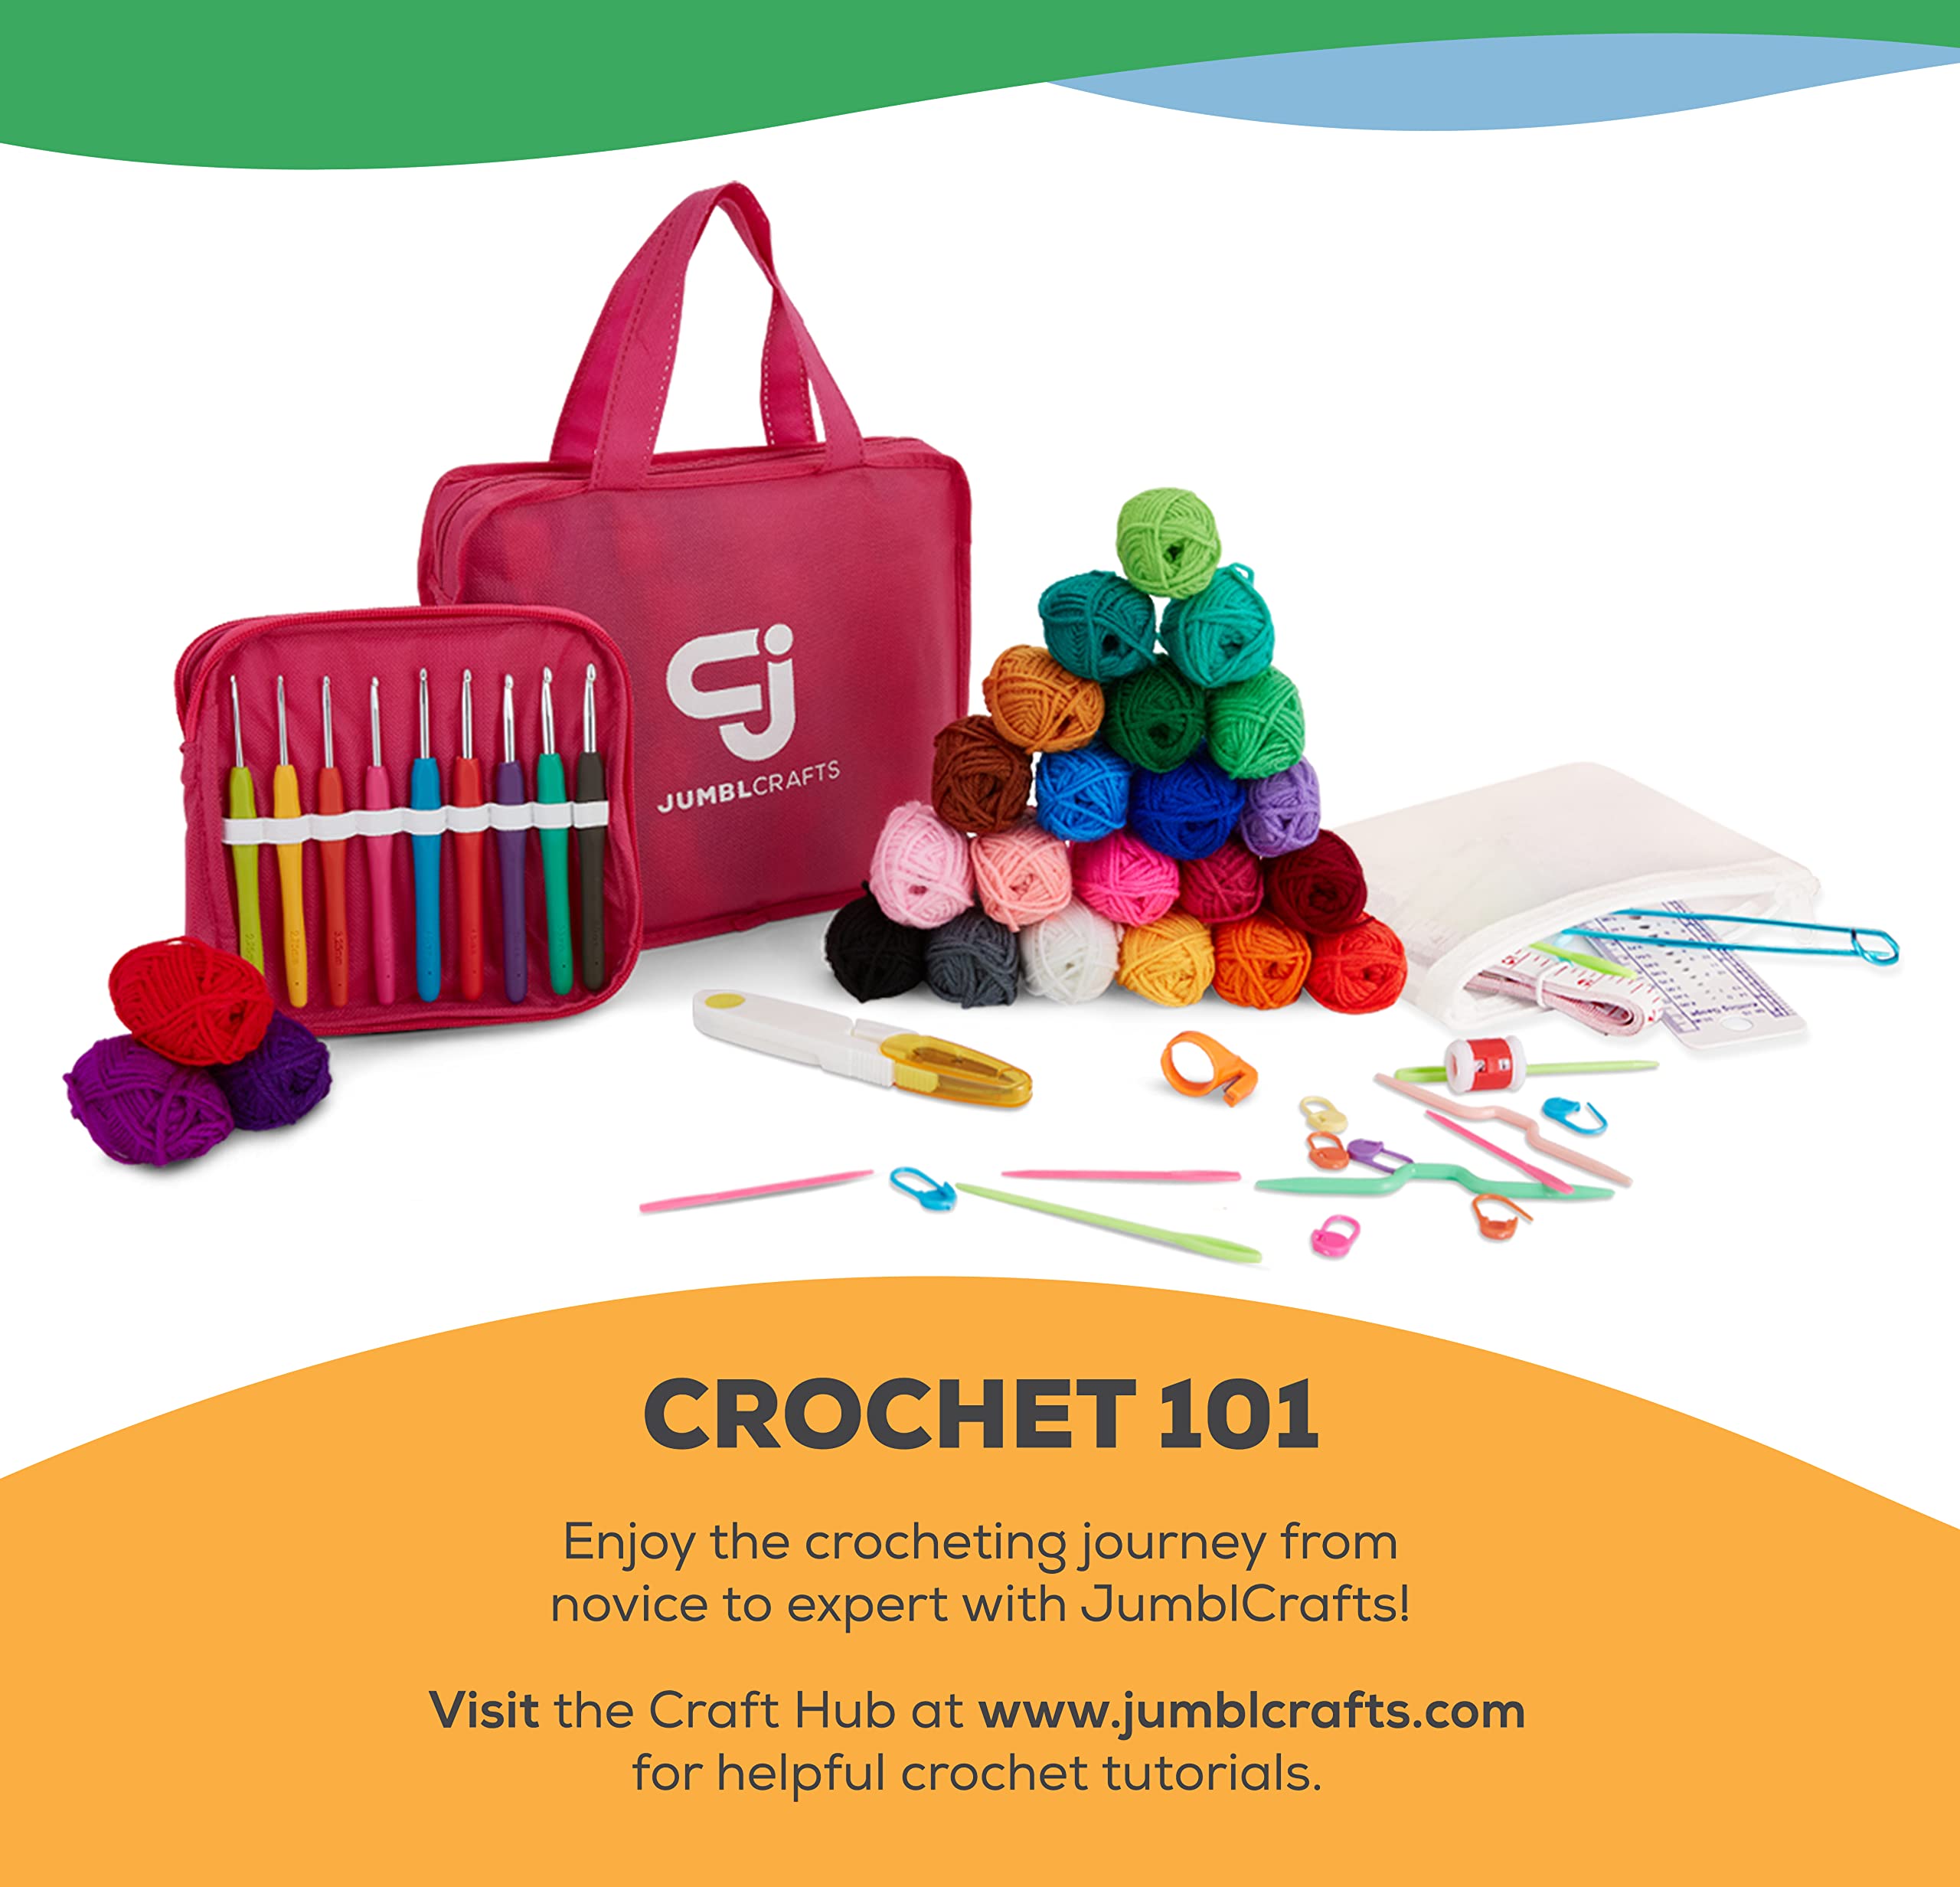 JumblCrafts Ultimate Crochet Starter Kit - 24 Fun-Sized Yarn Set with Travel Bag, Crochet Hooks, Row Counter, and More. 24 Assorted Colors of Acrylic Skeins for Crafters. for Beginners and Experts